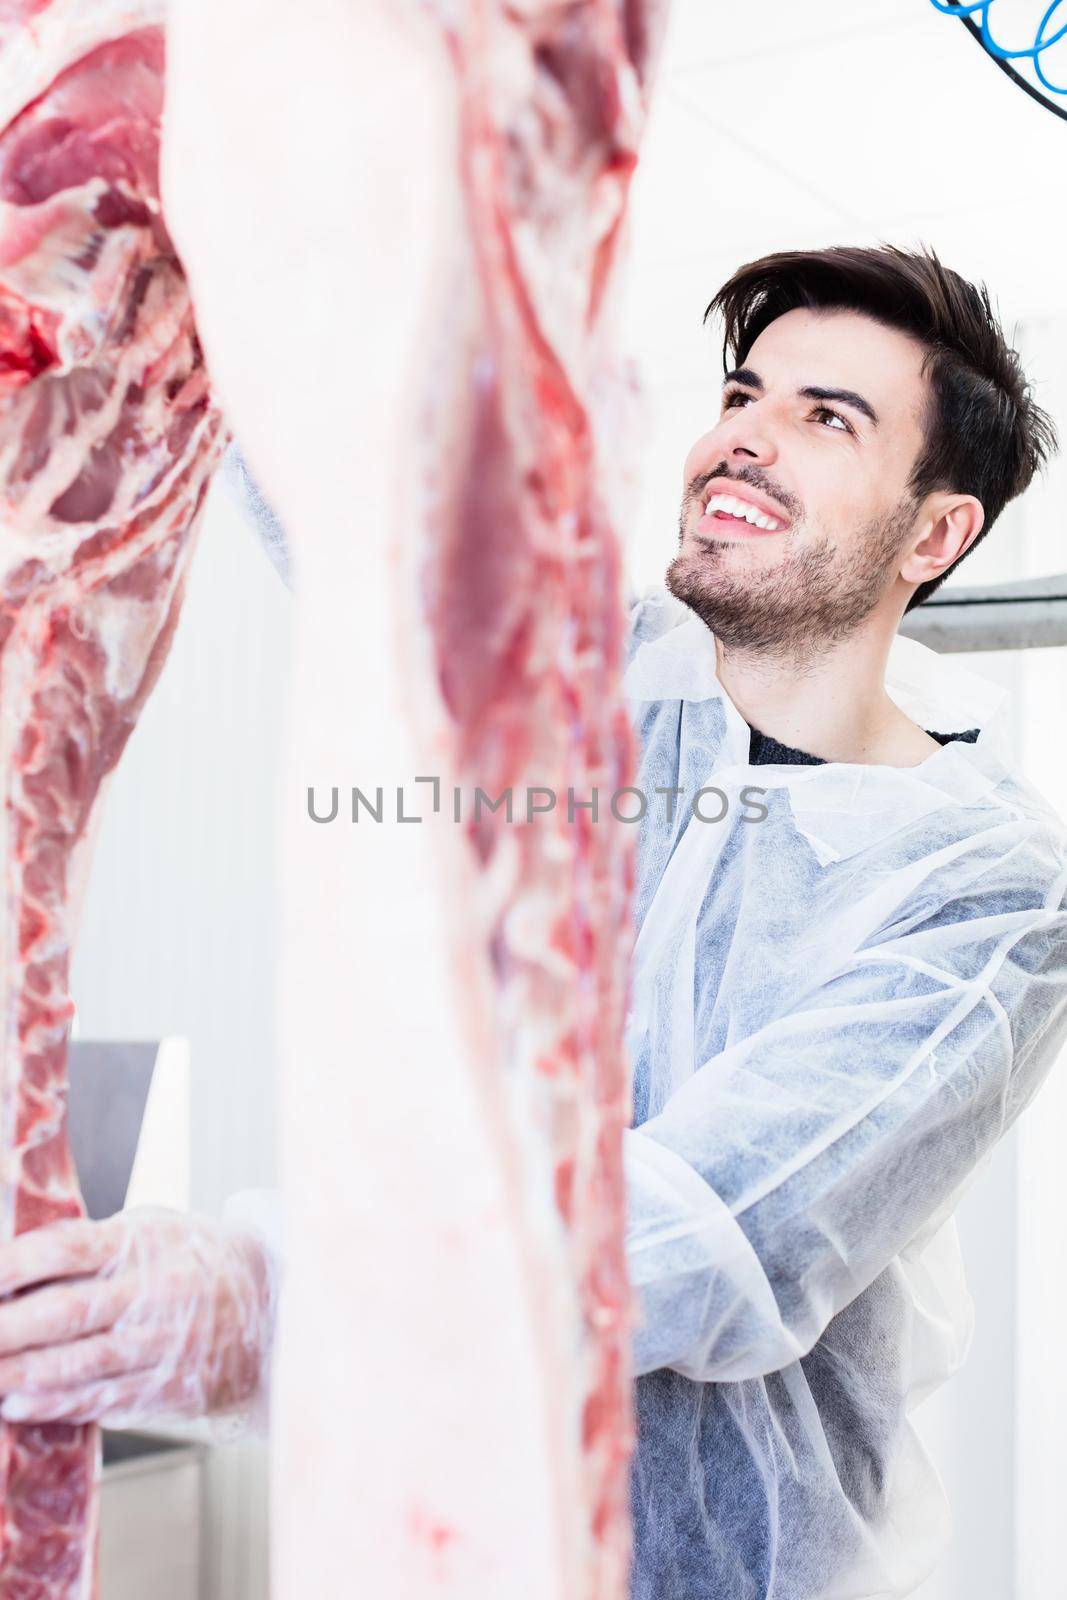 Butcher cutting pork in butchery working very concentrated